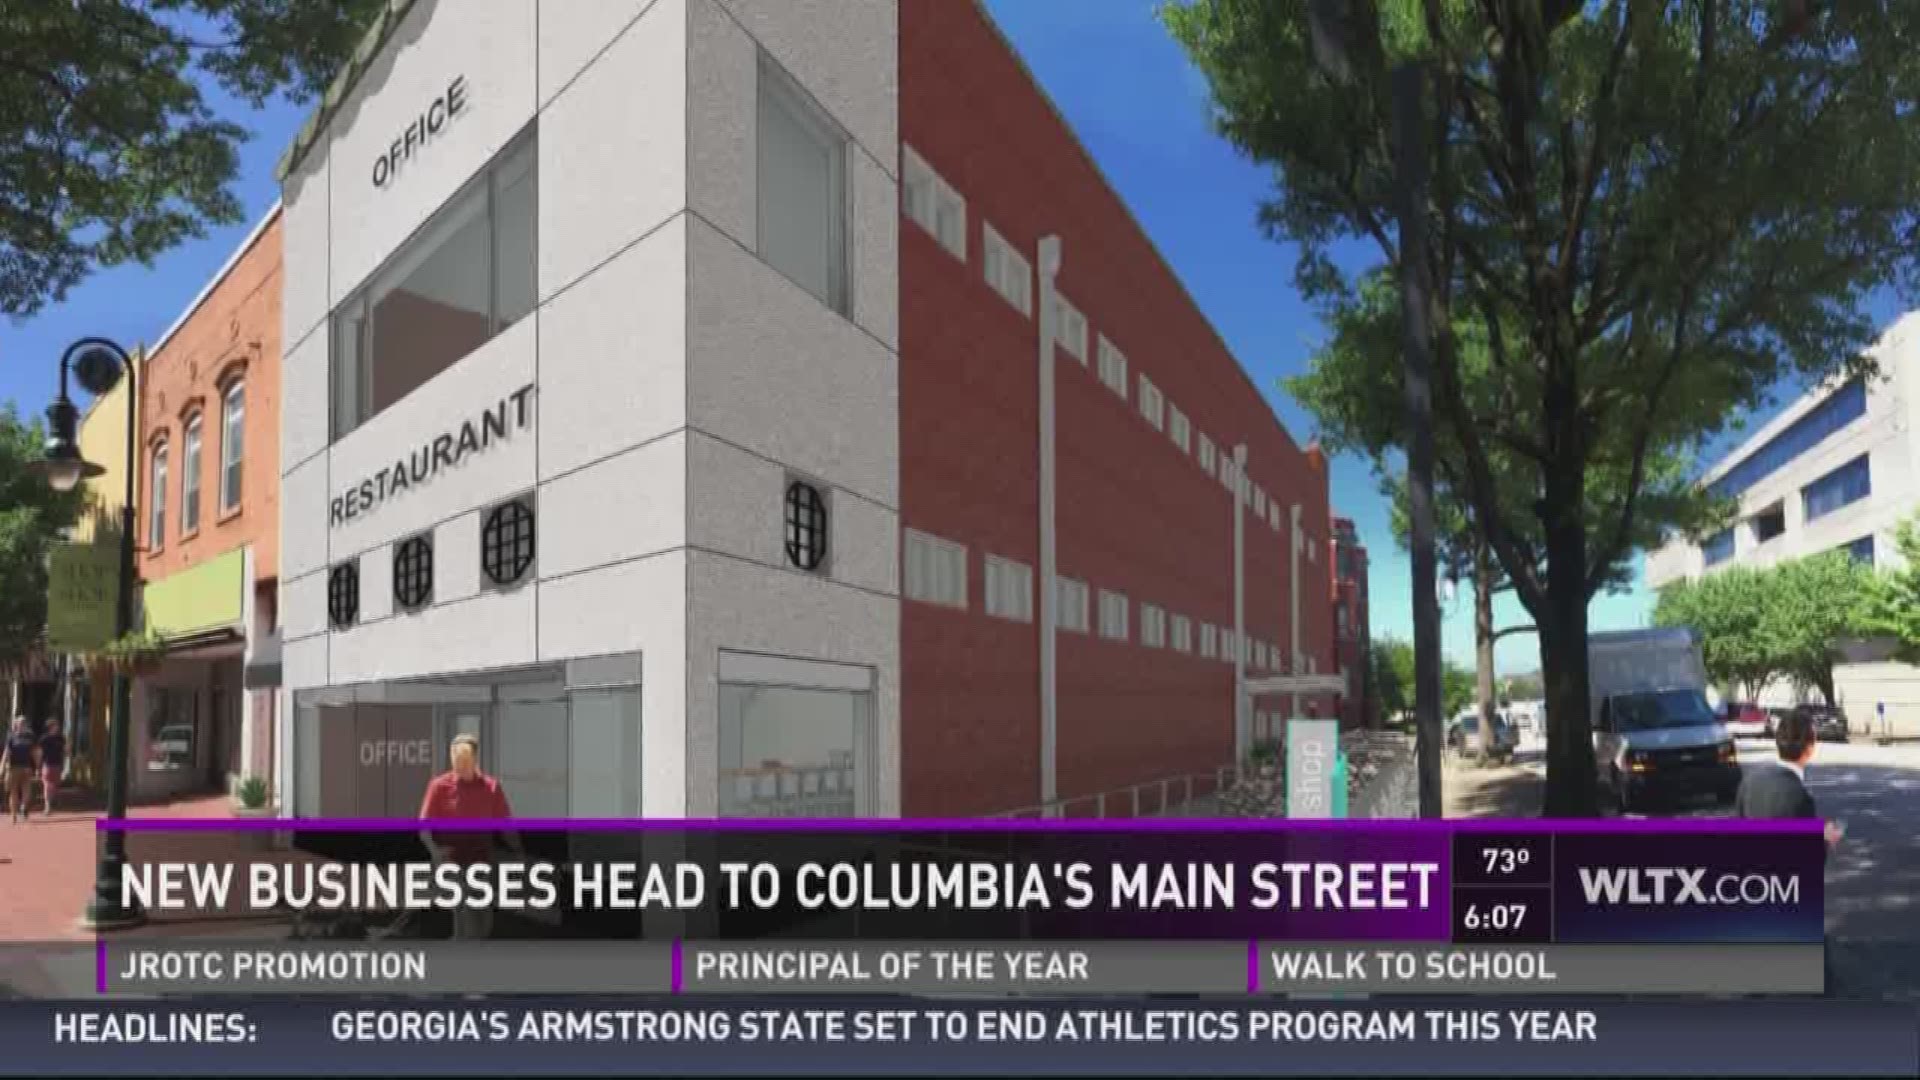 New businesses head to Columbia's Main Street. 